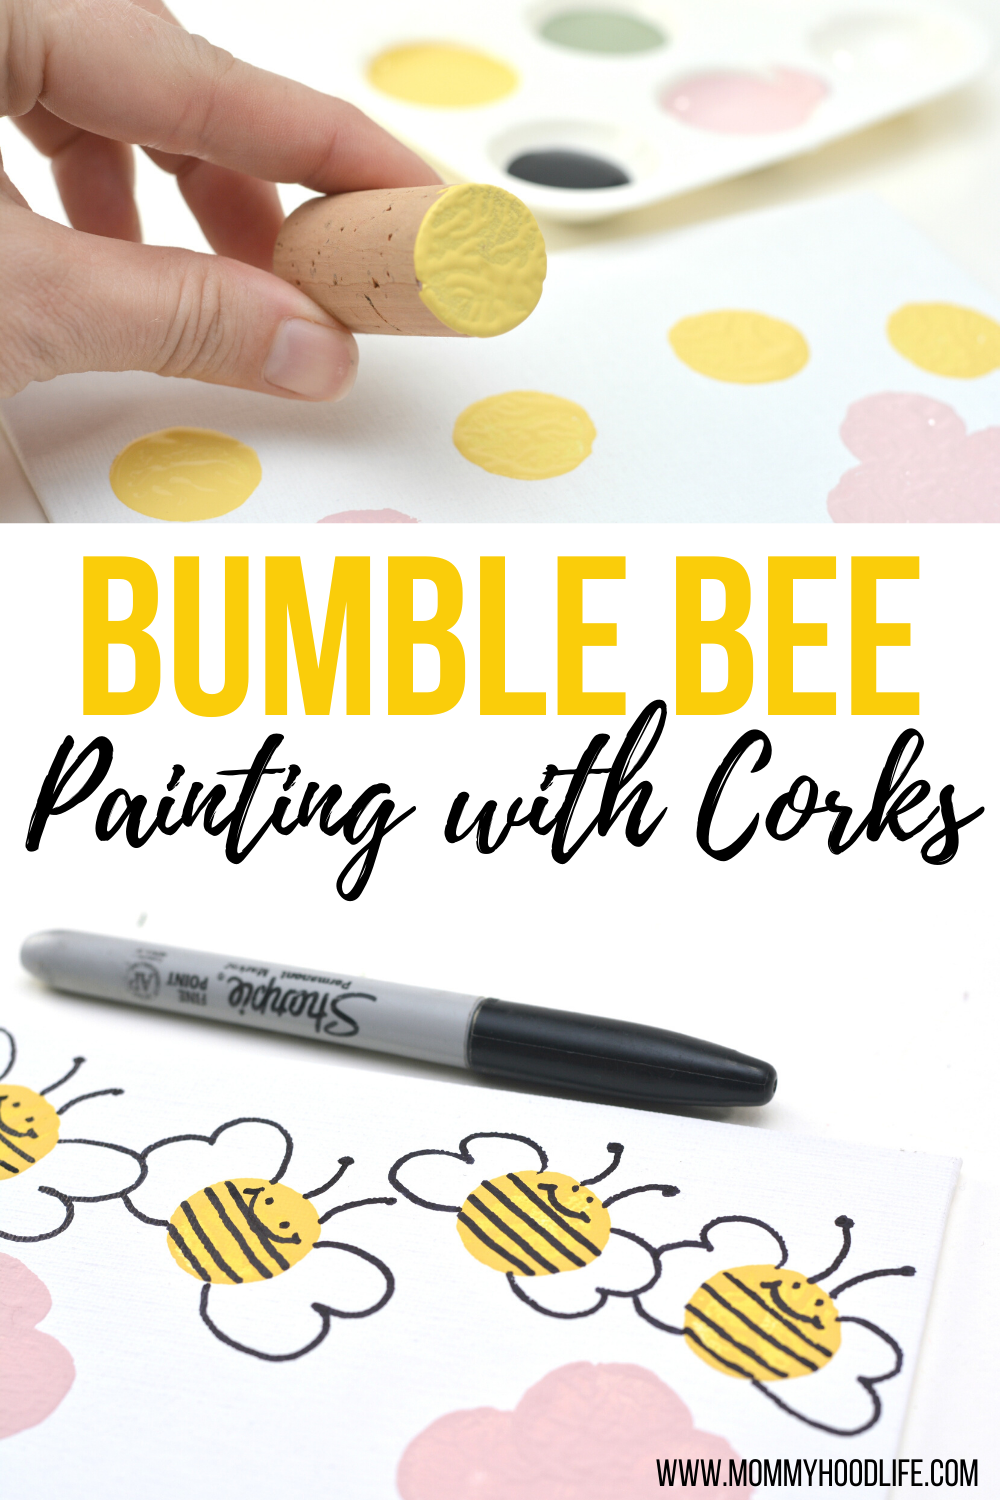 Painting with Corks